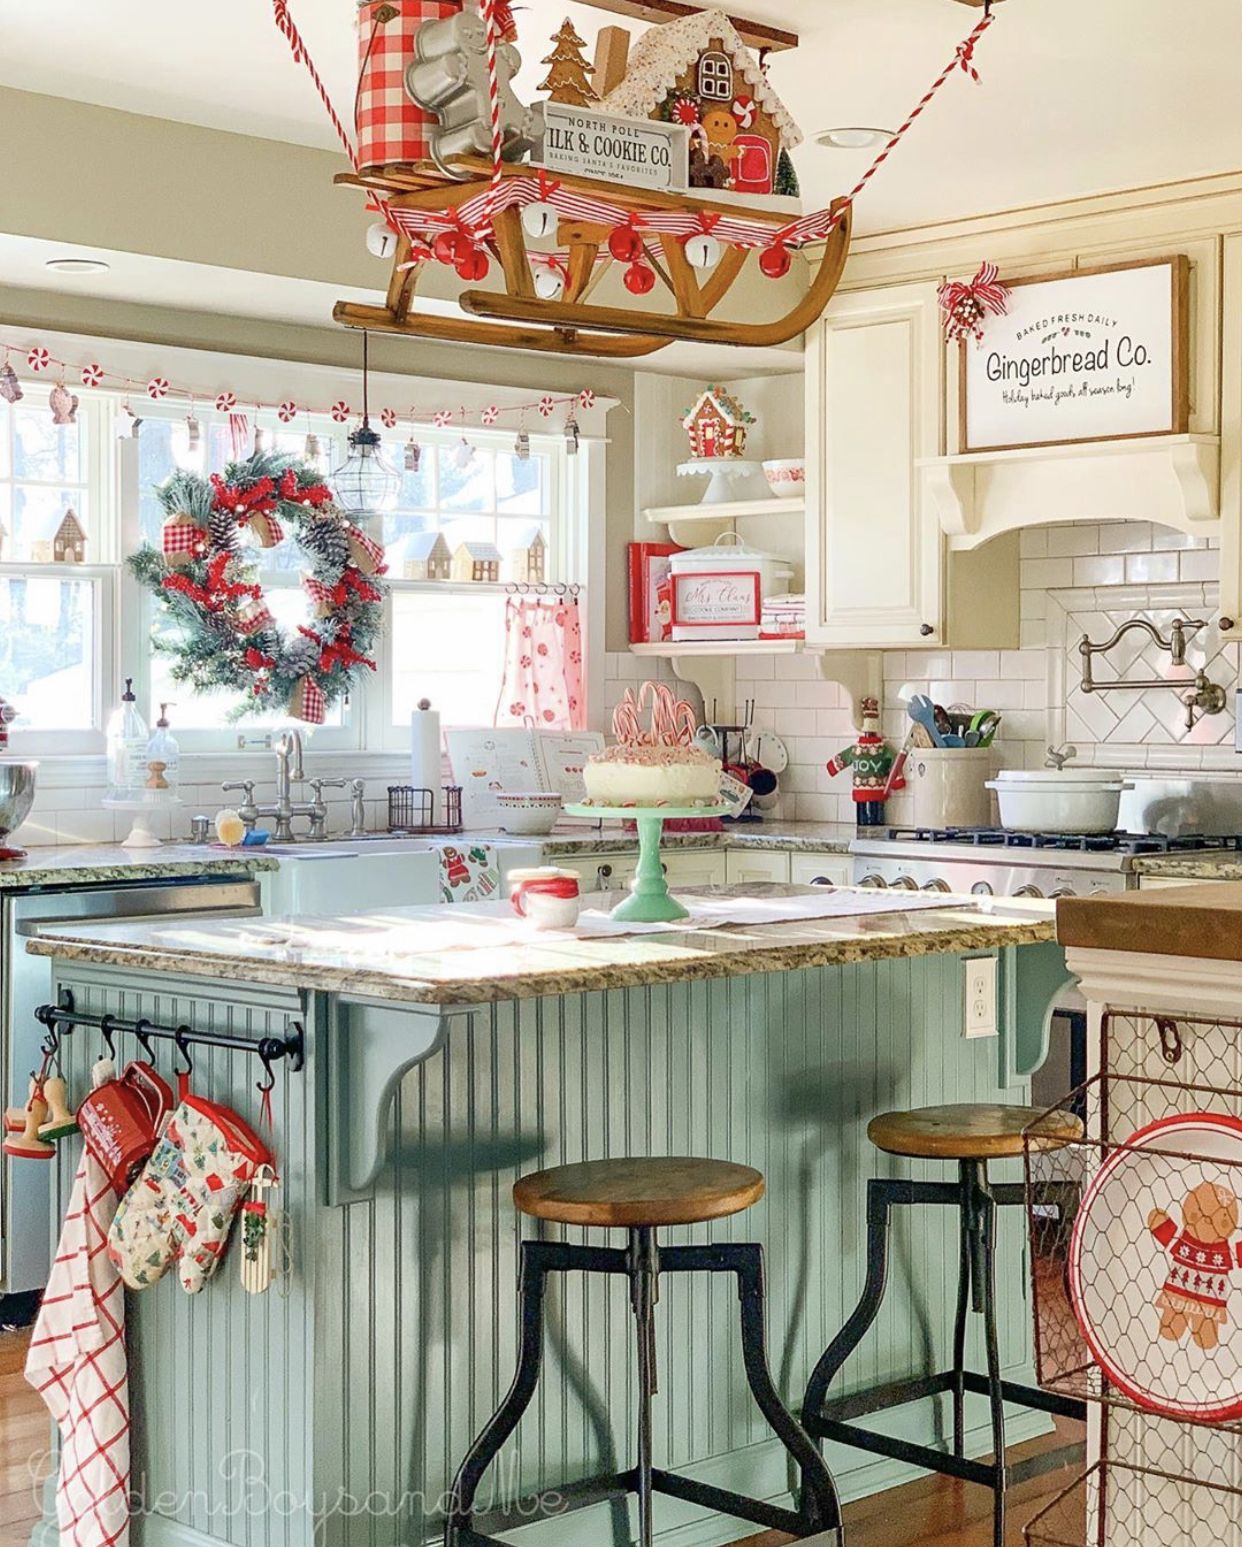 Give Your Kitchen Some Festive Cheer as Christmas Is Around